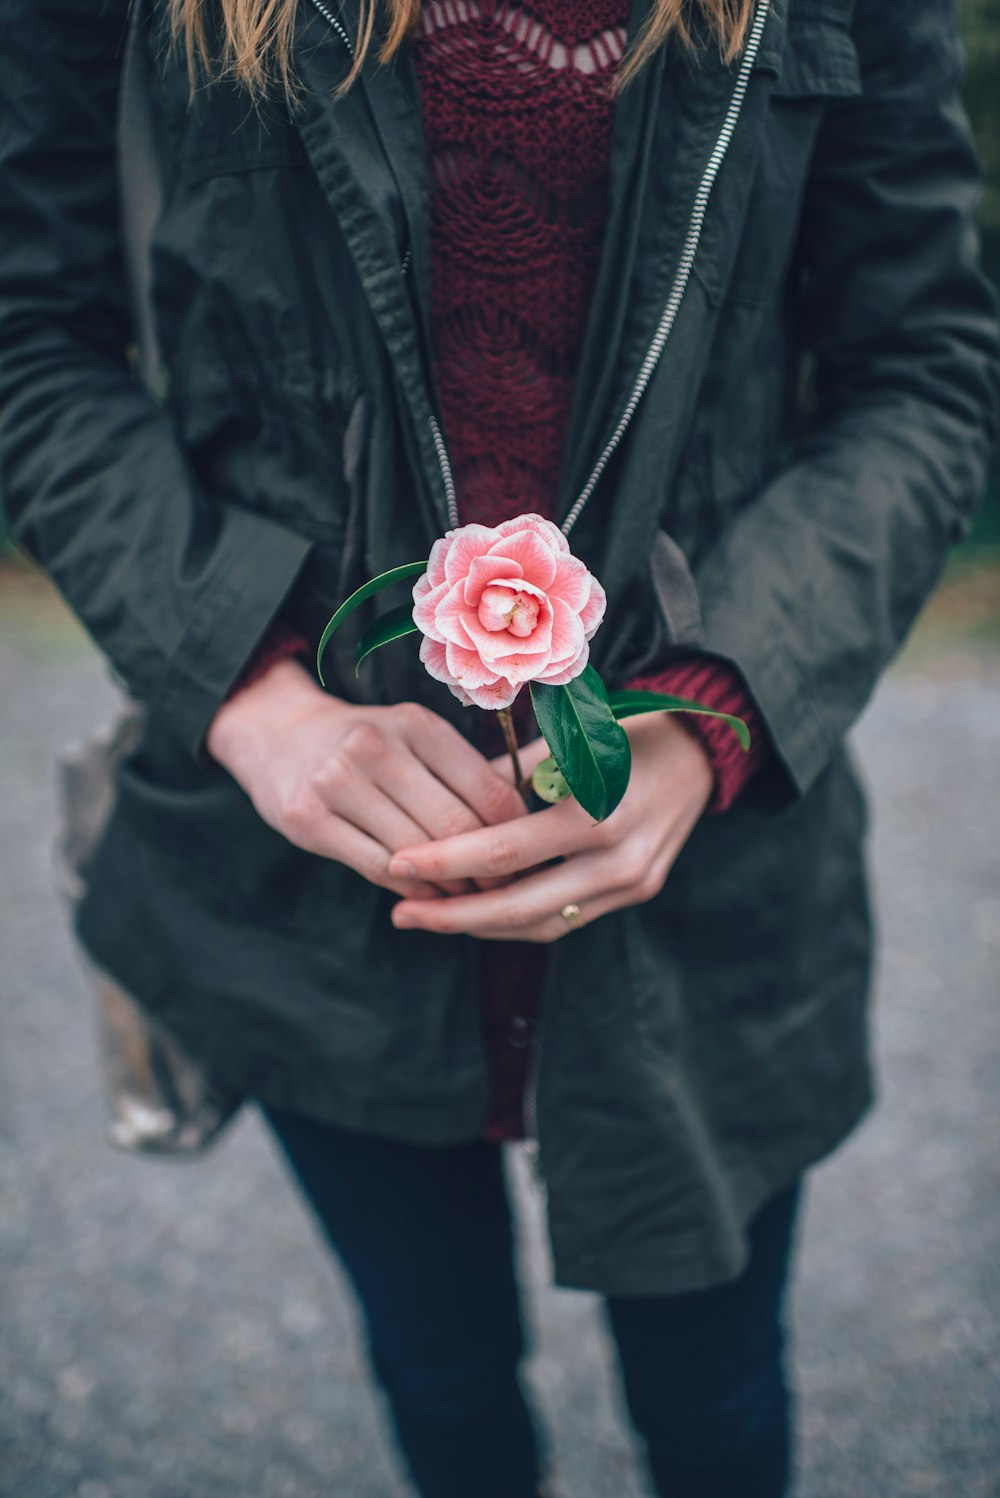 woman in black leather jacket holding pink flower during daytime